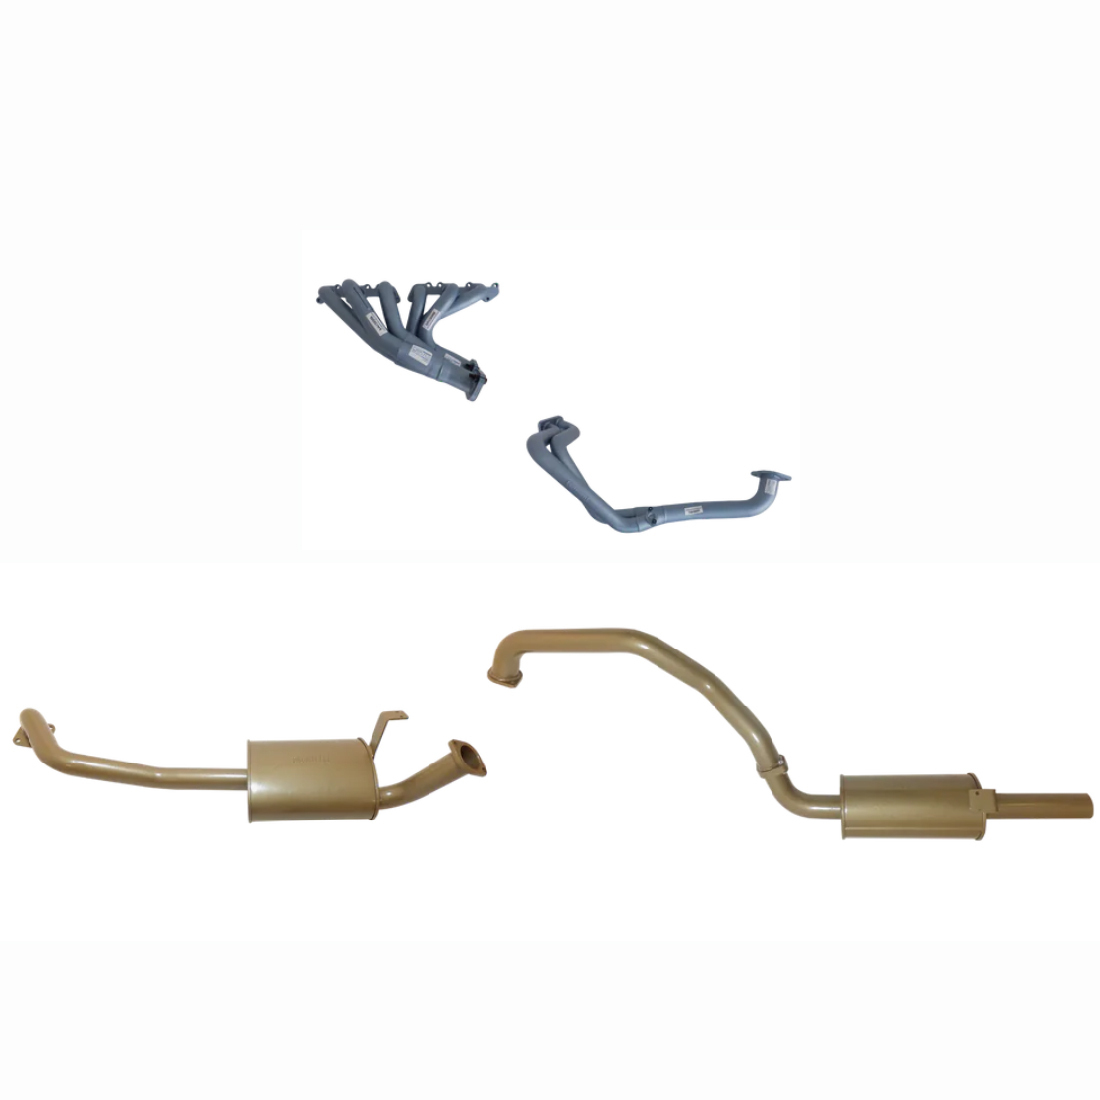 Toyota Landcruiser 80 Series 6 Cyl 4.5L Petrol 1989/1997 - Single 2 1/2" with Headers Kit image